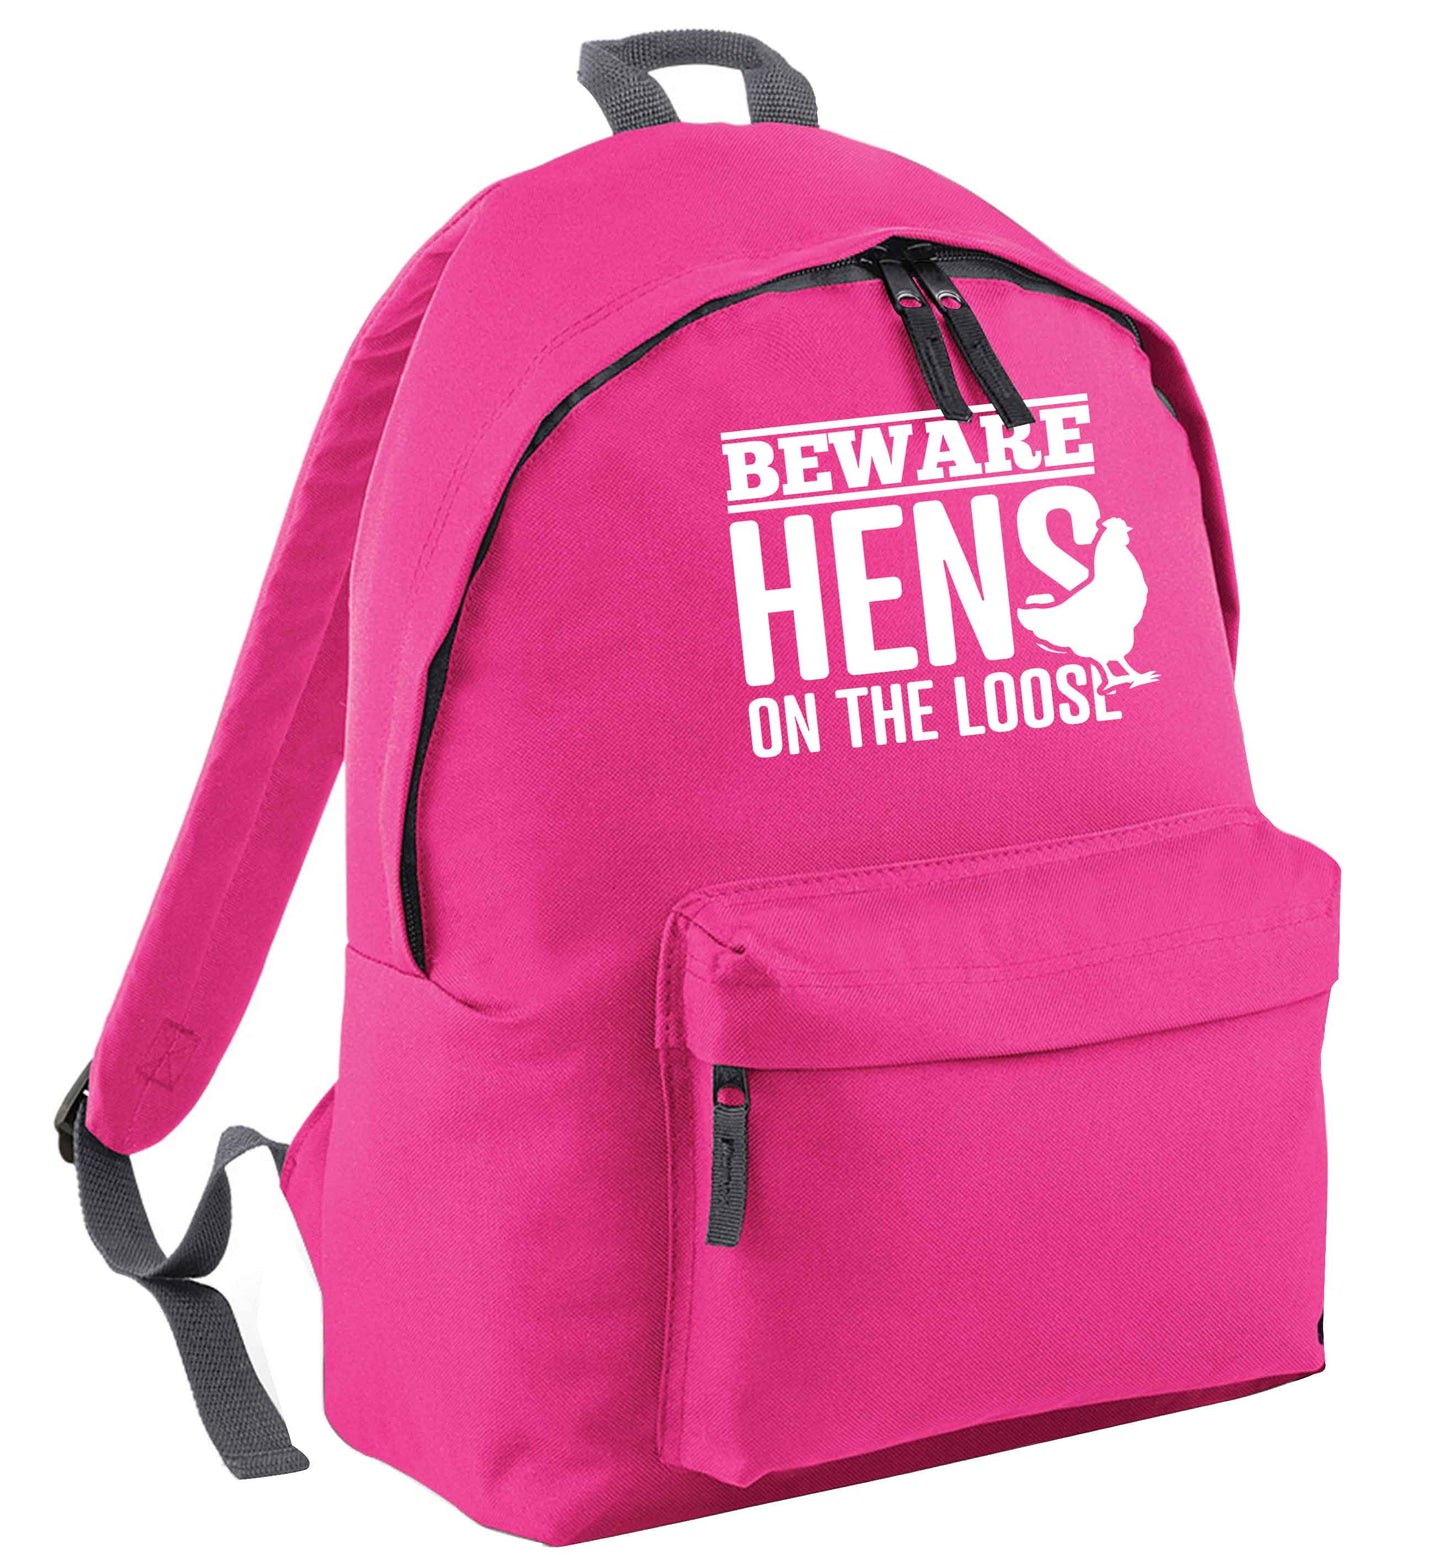 Beware hens on the loose pink adults backpack